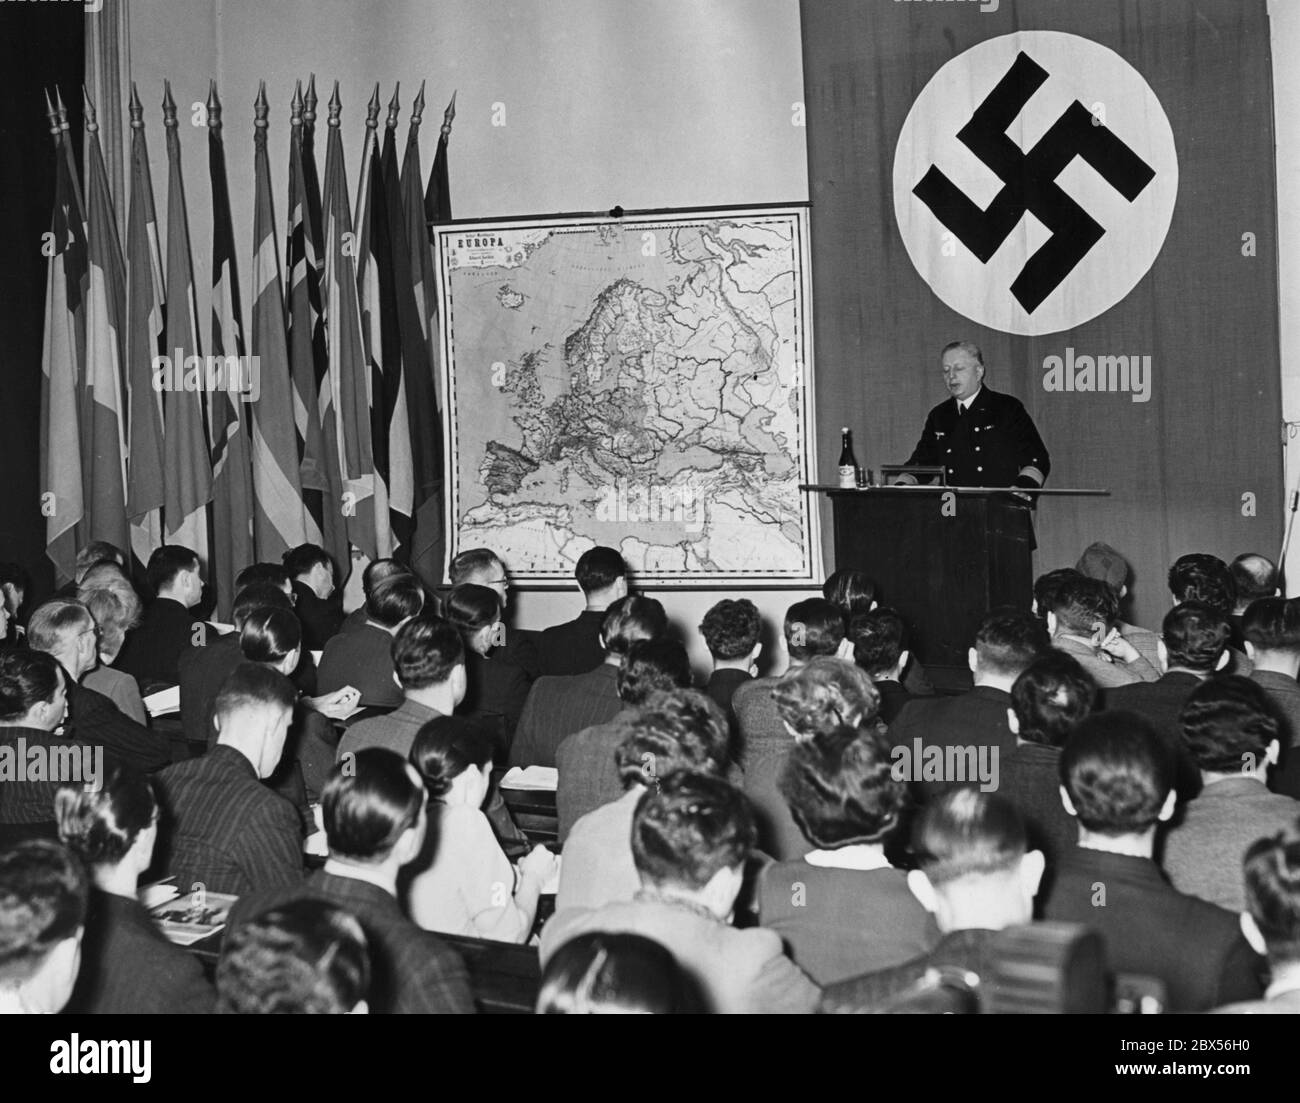 The Institute for International Studies at the University of Berlin organized a holiday course named 'Germany at War', in which more than 200 foreign students from 36 different nations are participating. Here a view into the lecture hall during a lecture by Rear Admiral Gladow. On the wall to the left of a swastika flag is a map of Europe and several national flags. Stock Photo